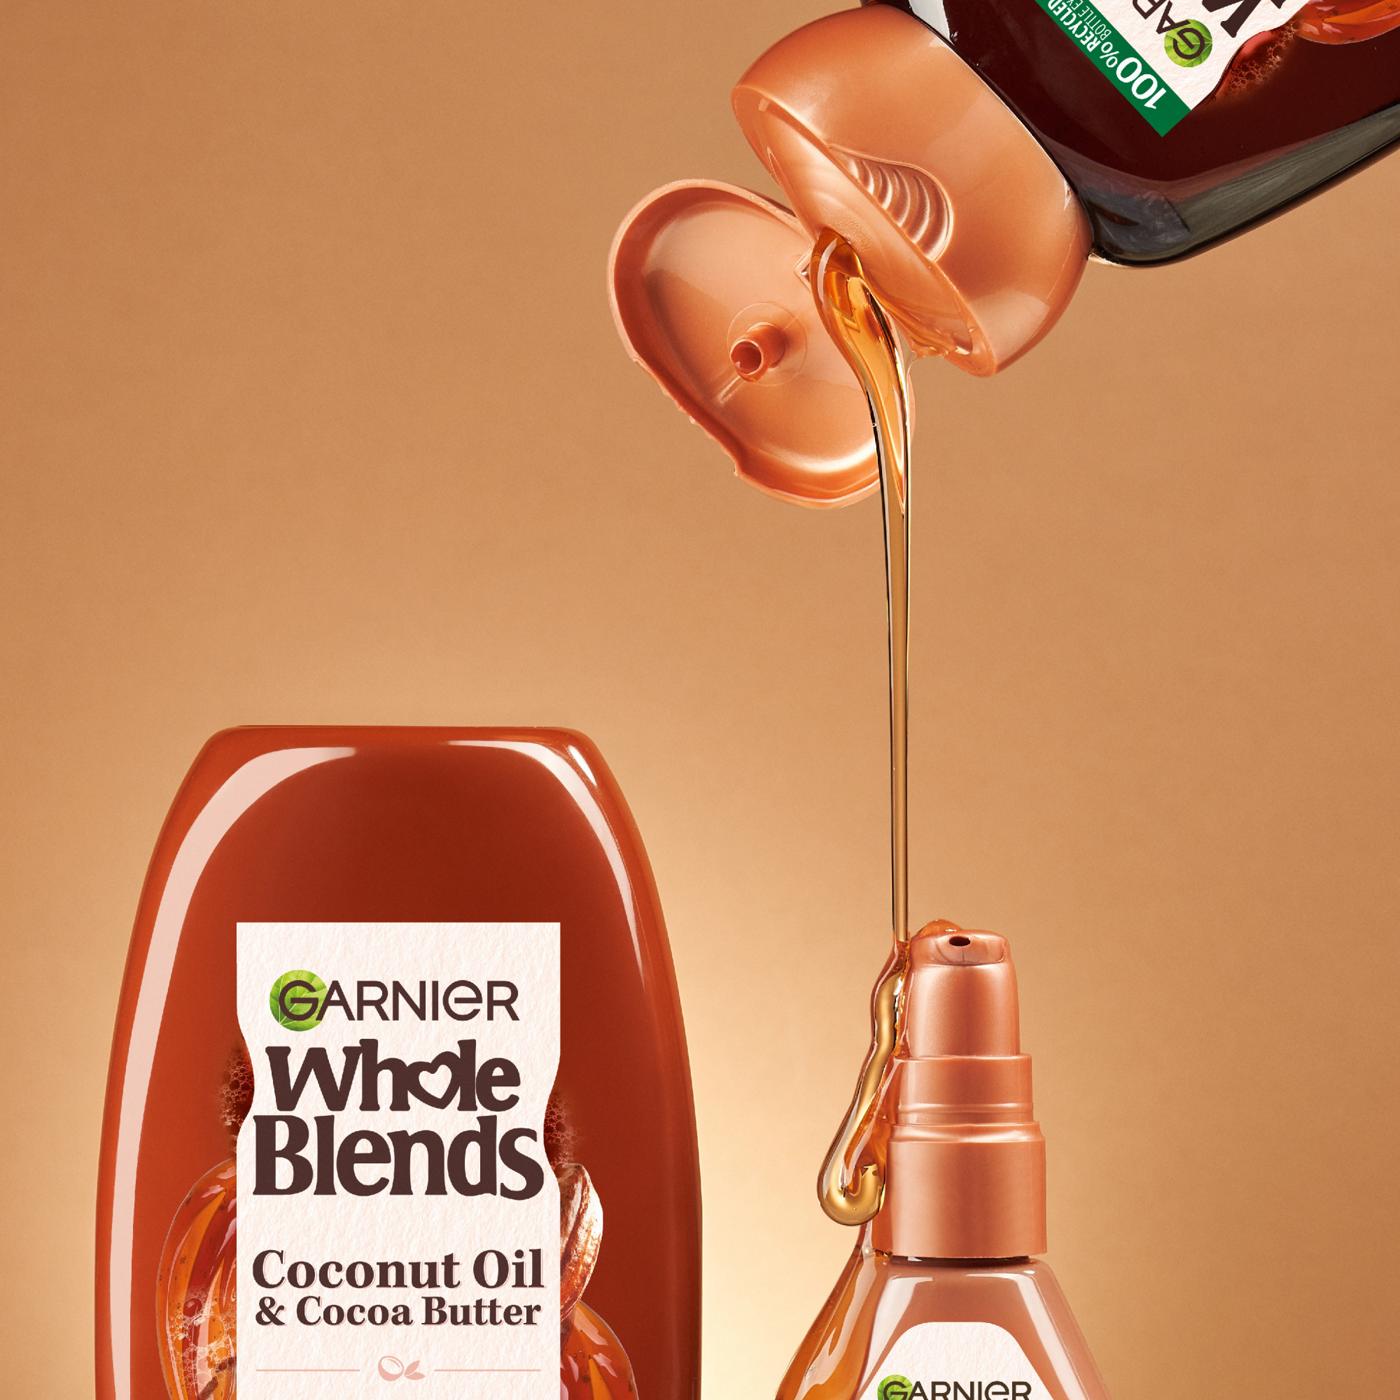 Garnier Whole Blends Leave-In Conditioner, Coconut Oil and Cocoa Butter; image 9 of 10